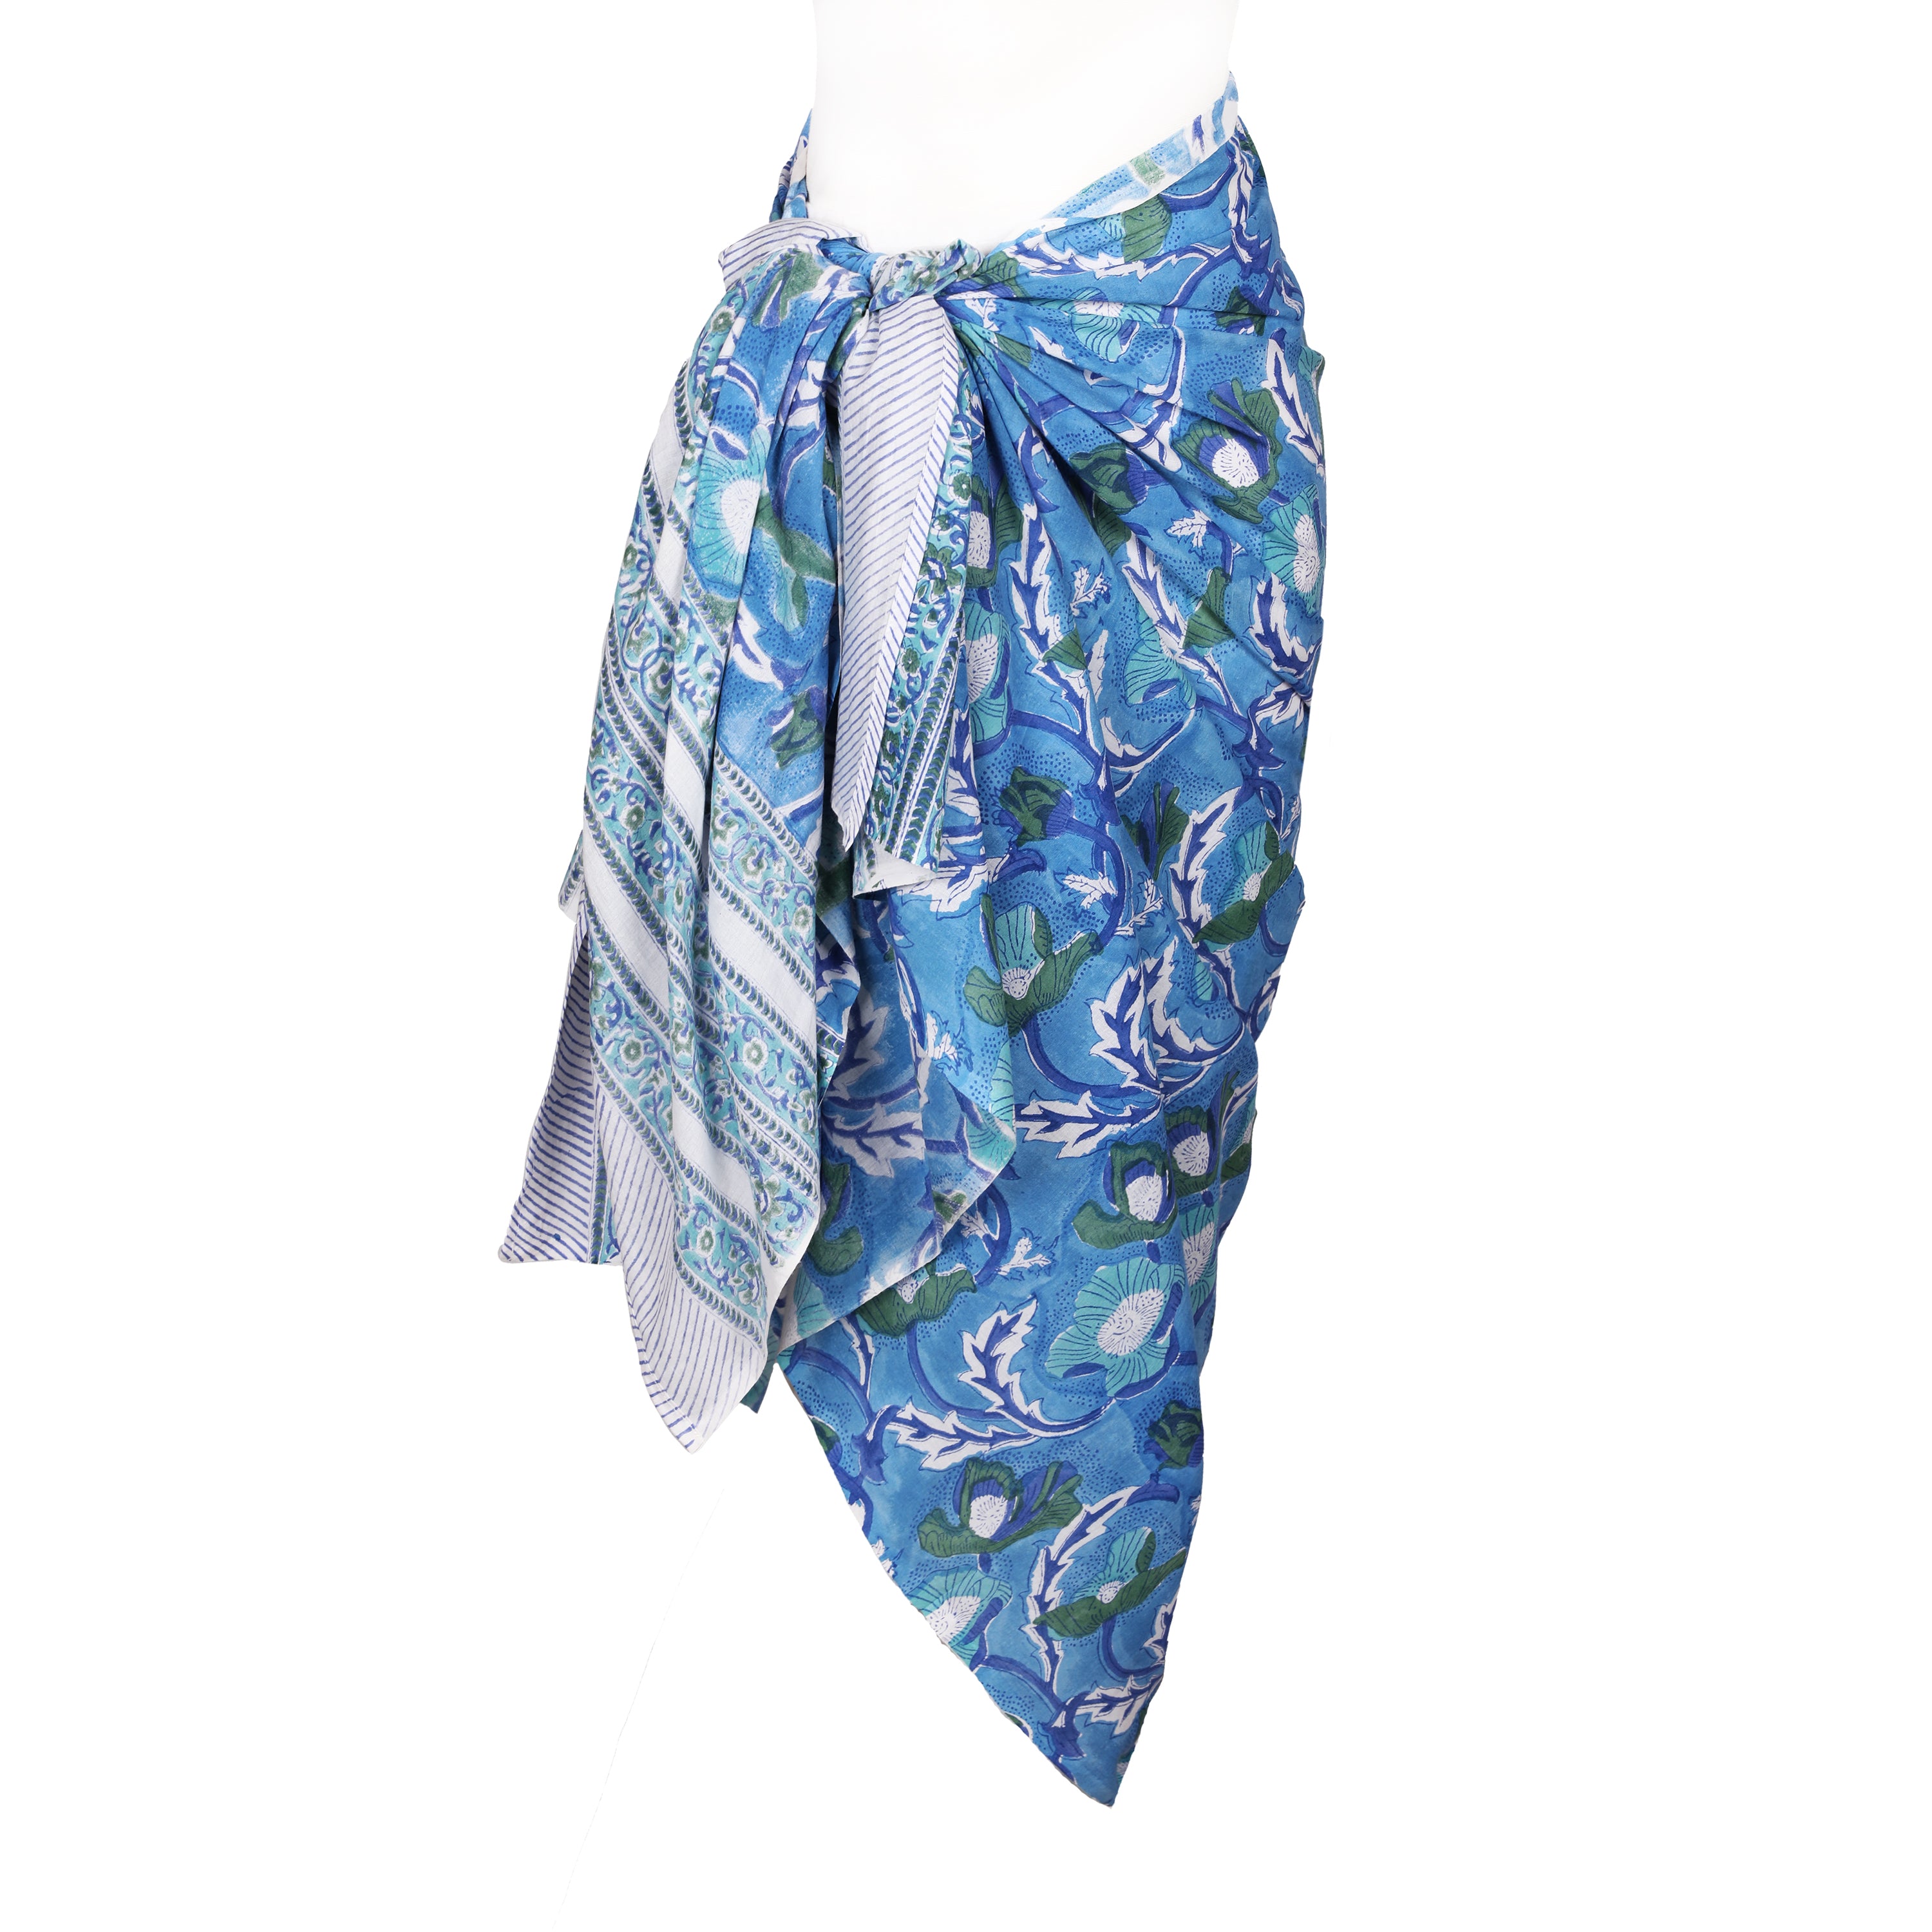 Tisbury Floral Pareo Coverup